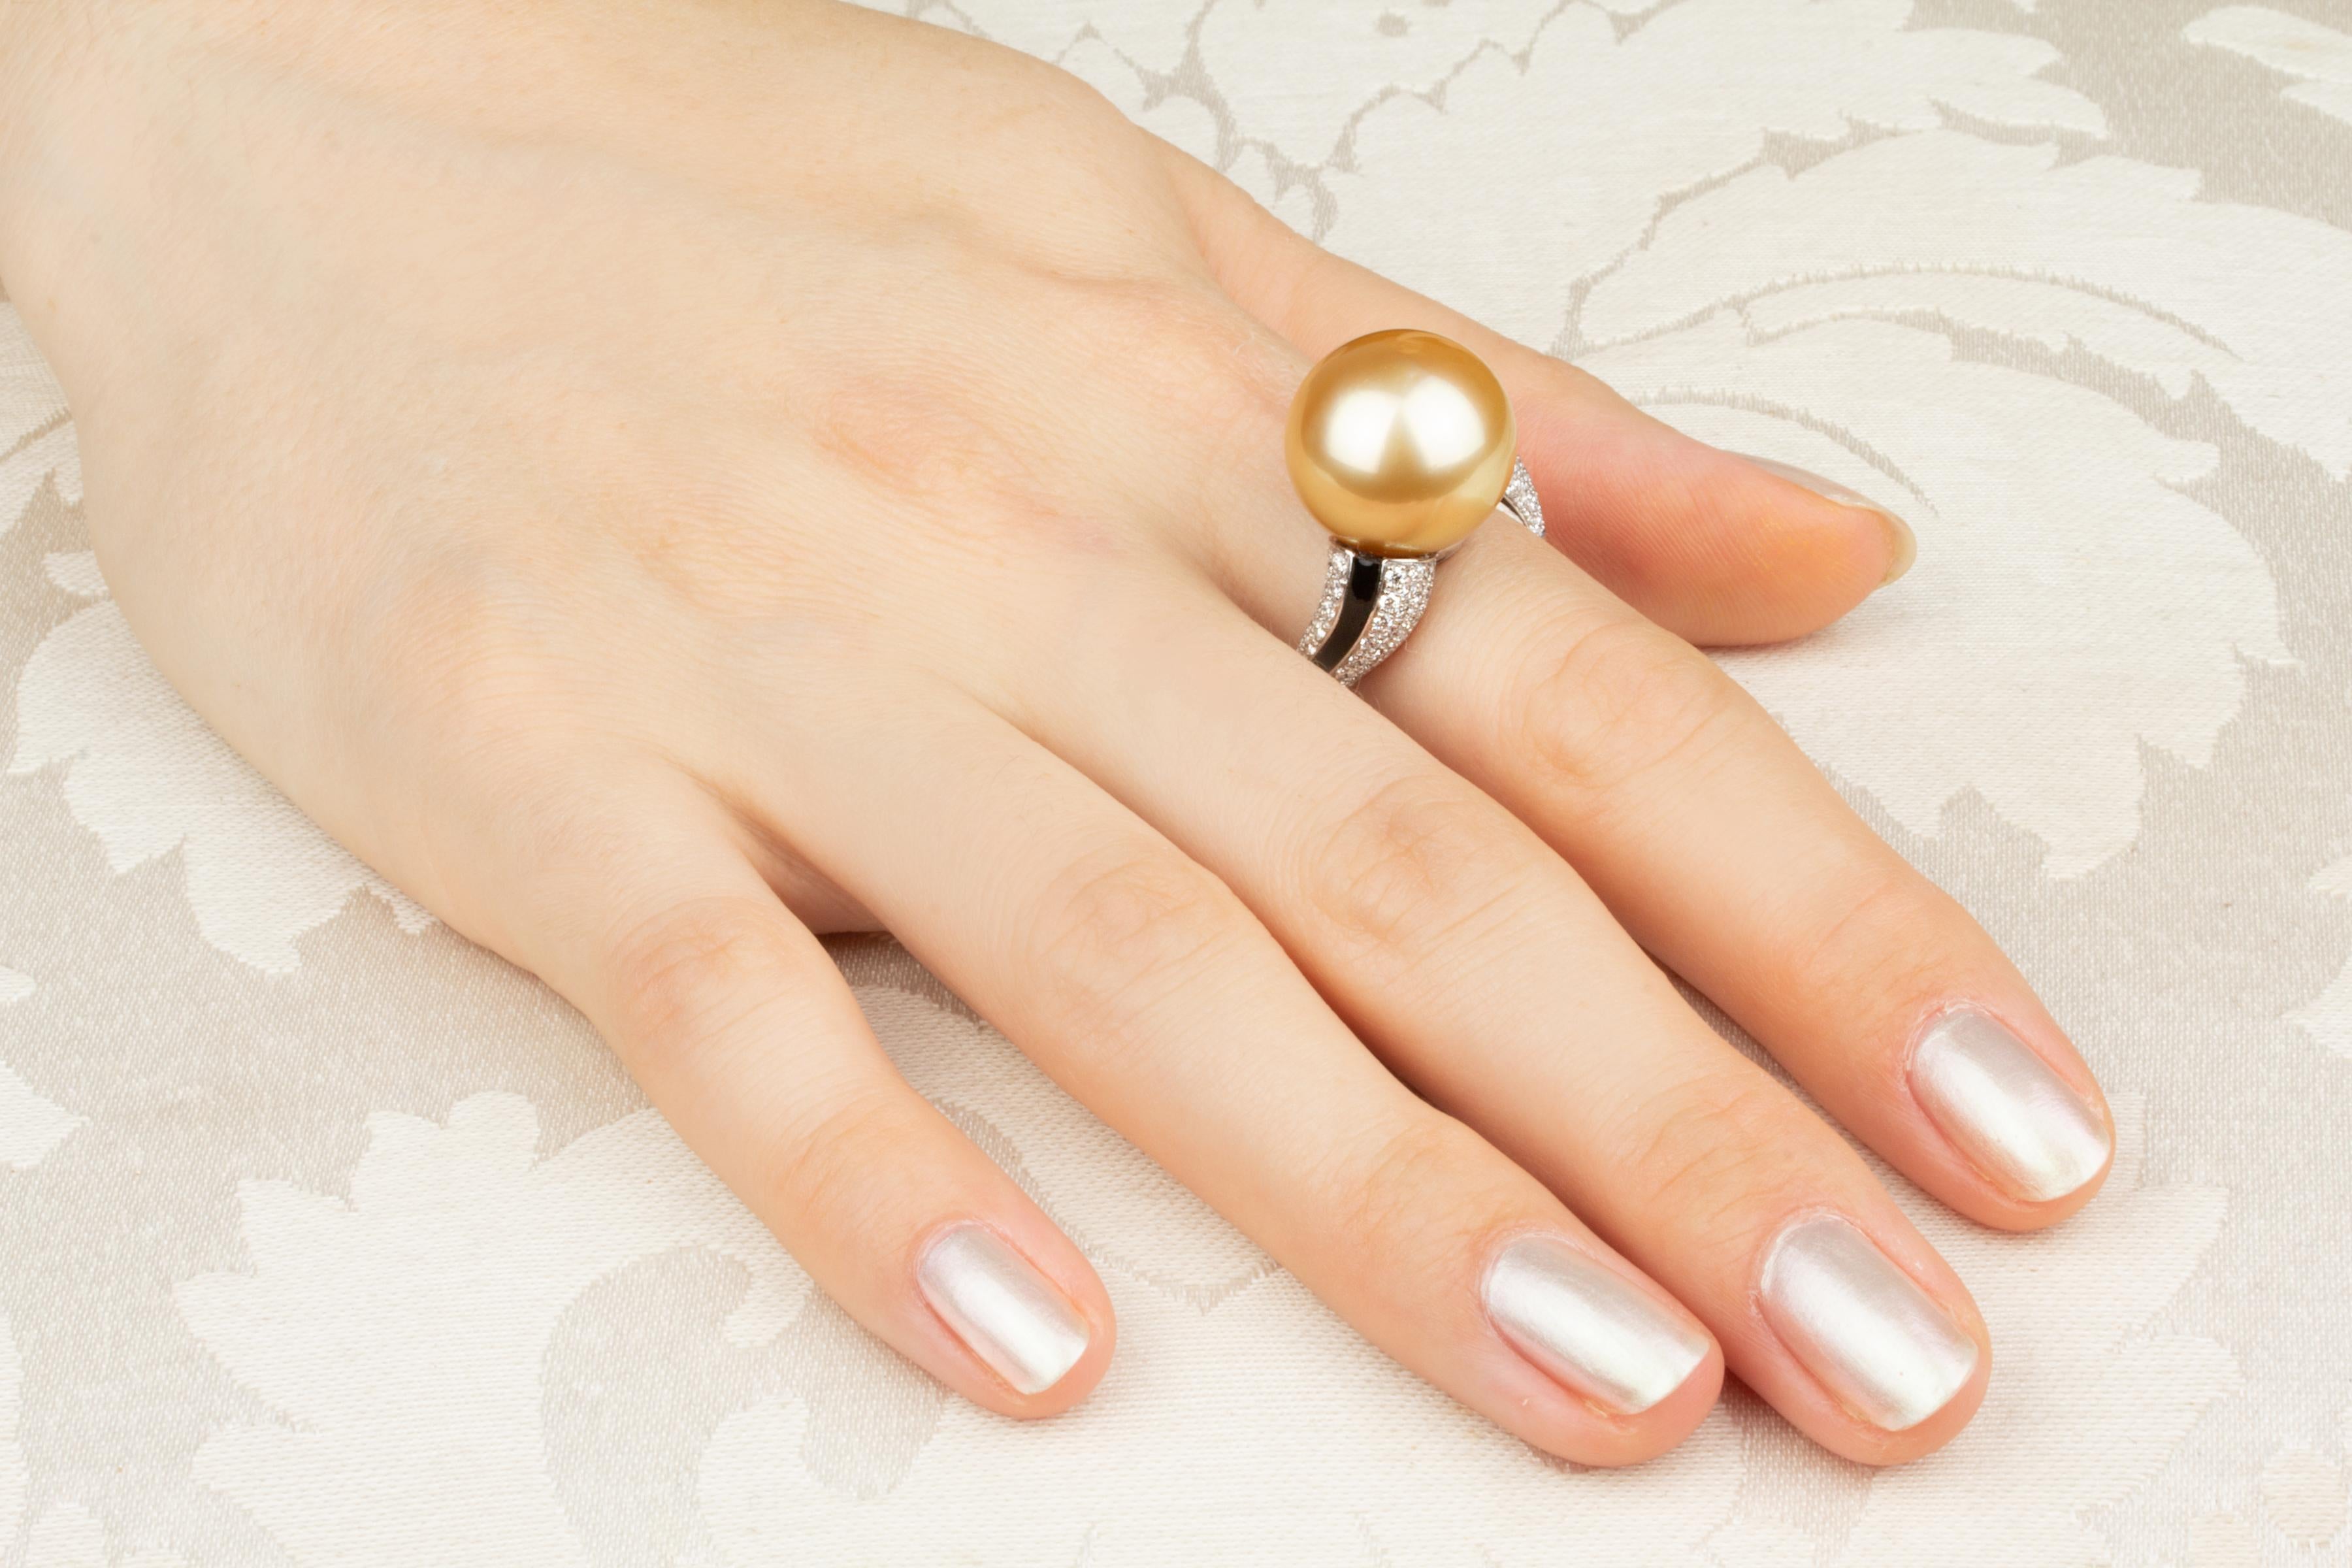 This golden pearl and diamond ring features a splendid pearl of 15.5/16mm diameter. The pearl is untreated. It displays fine nacre and its natural color and luster have not been enhanced in any way. The pearl is flanked by custom cut black onyx